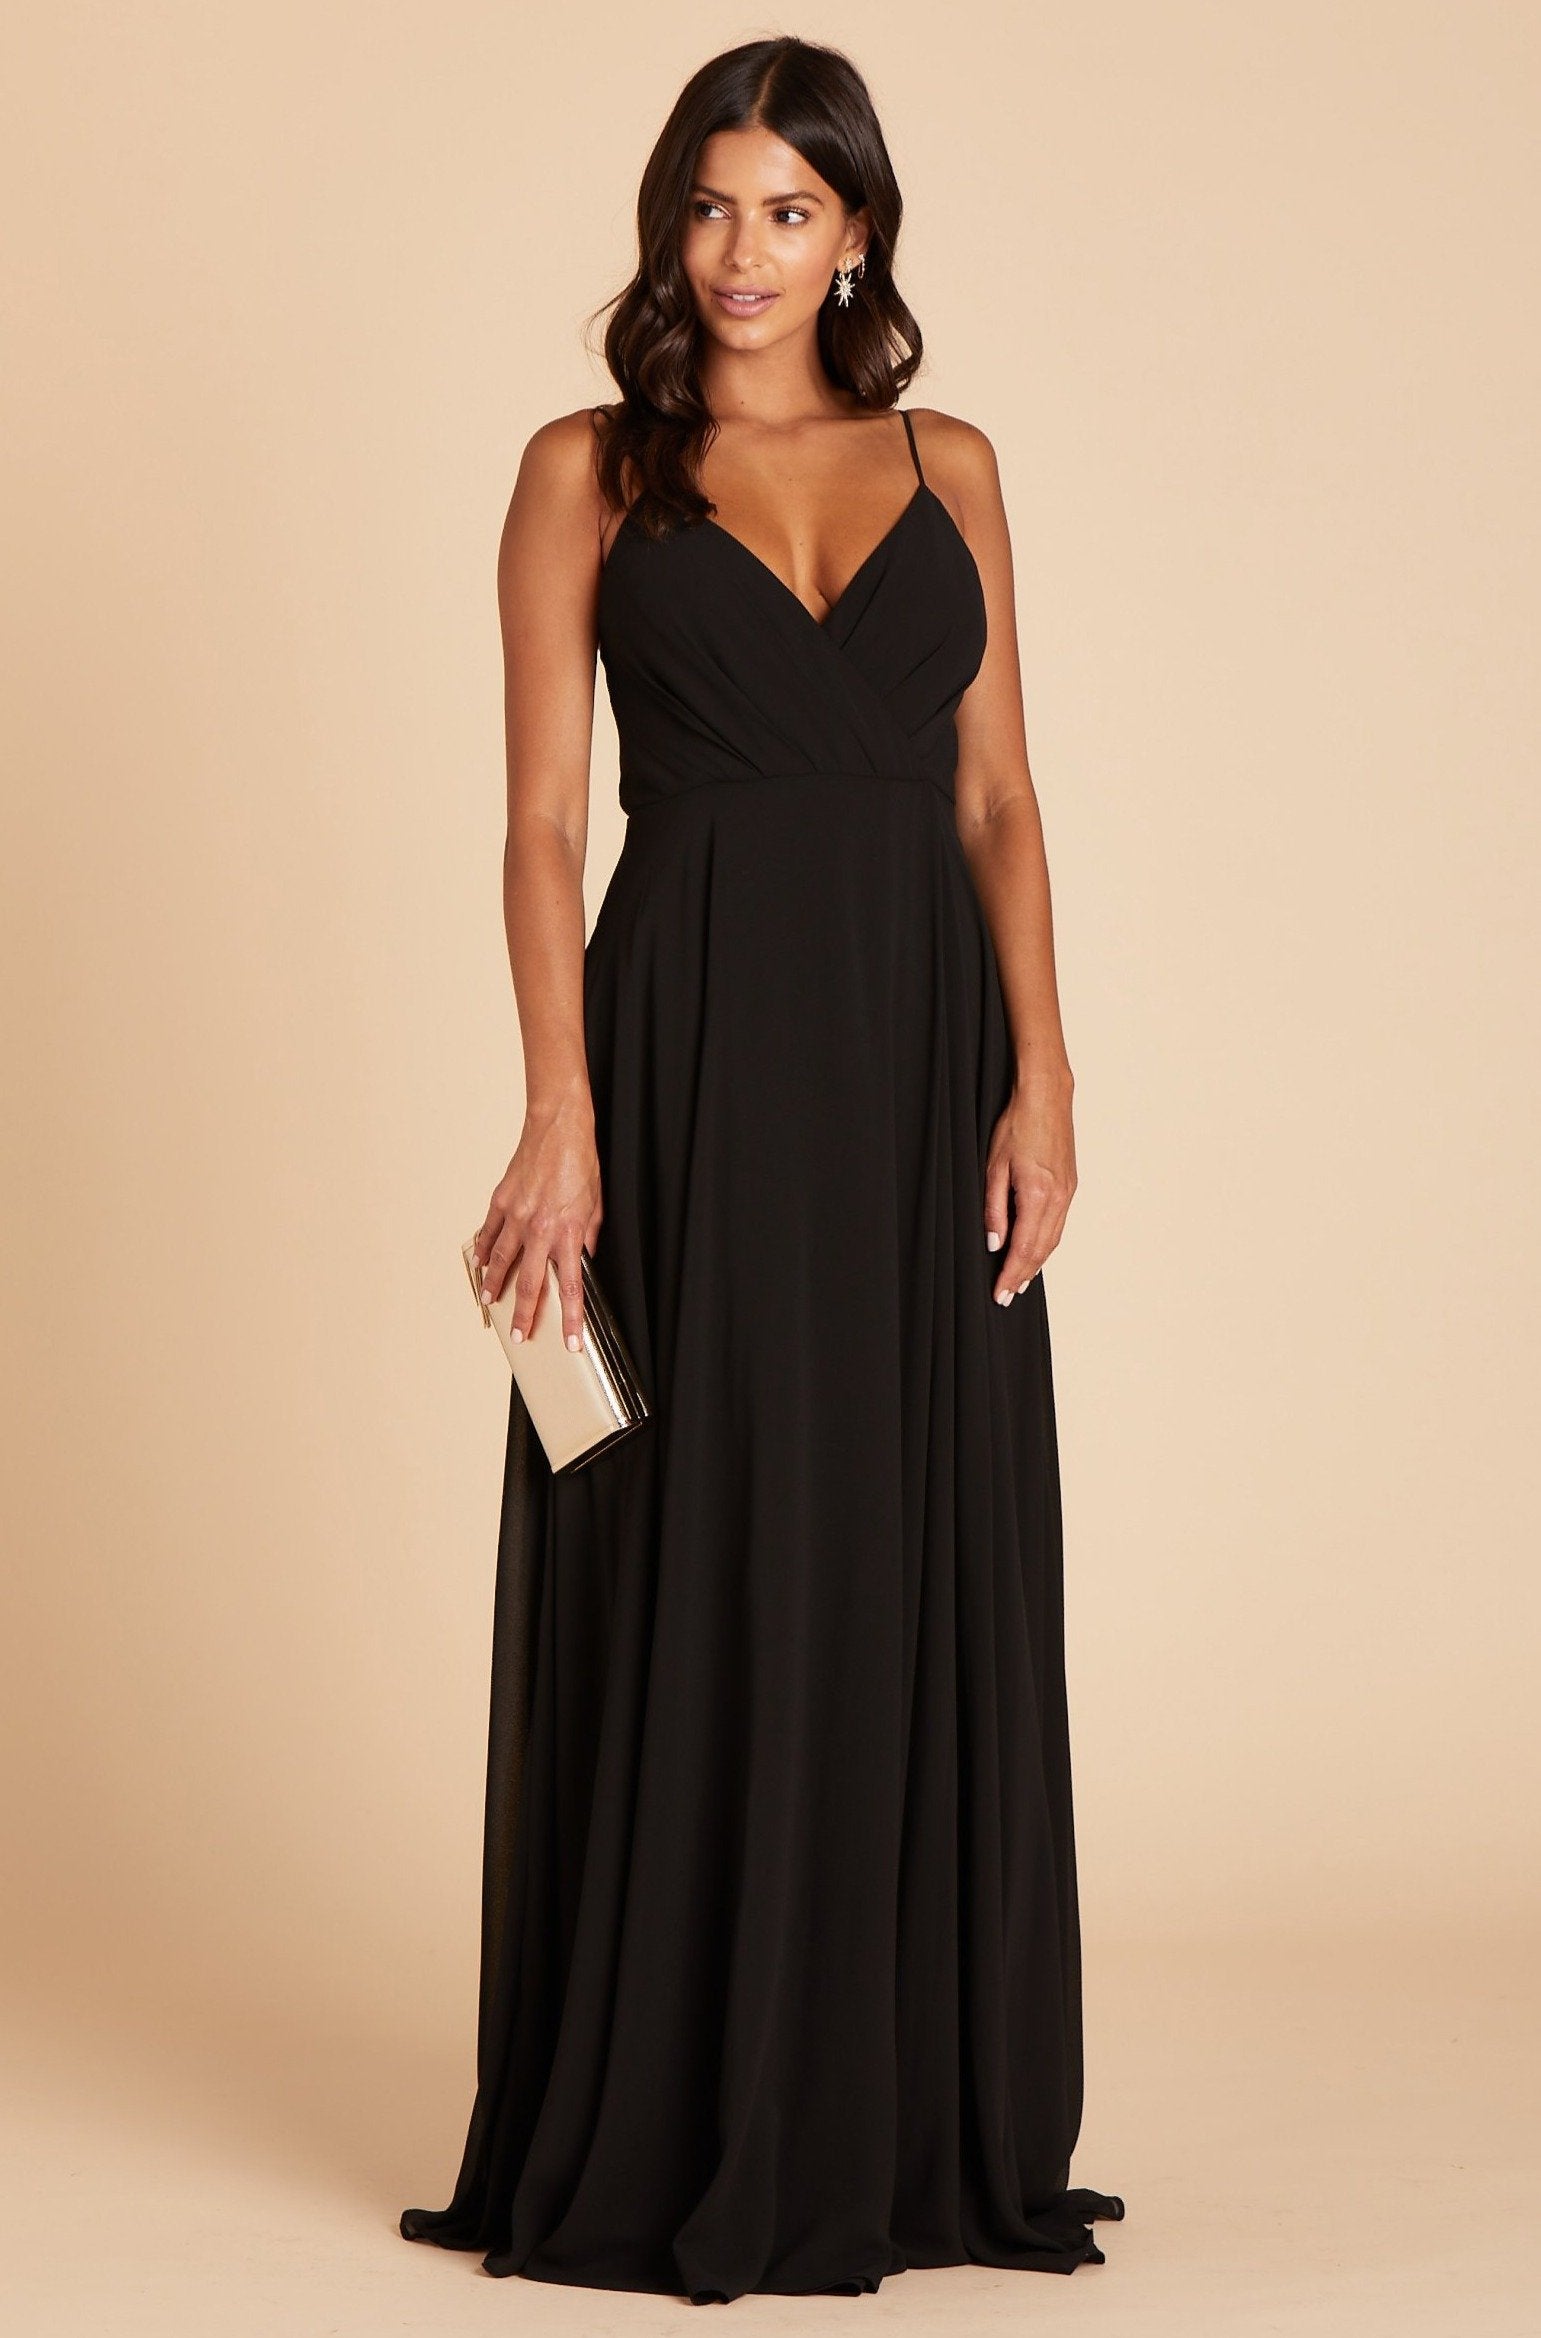 Kaia bridesmaids dress in black chiffon by Birdy Grey, front view